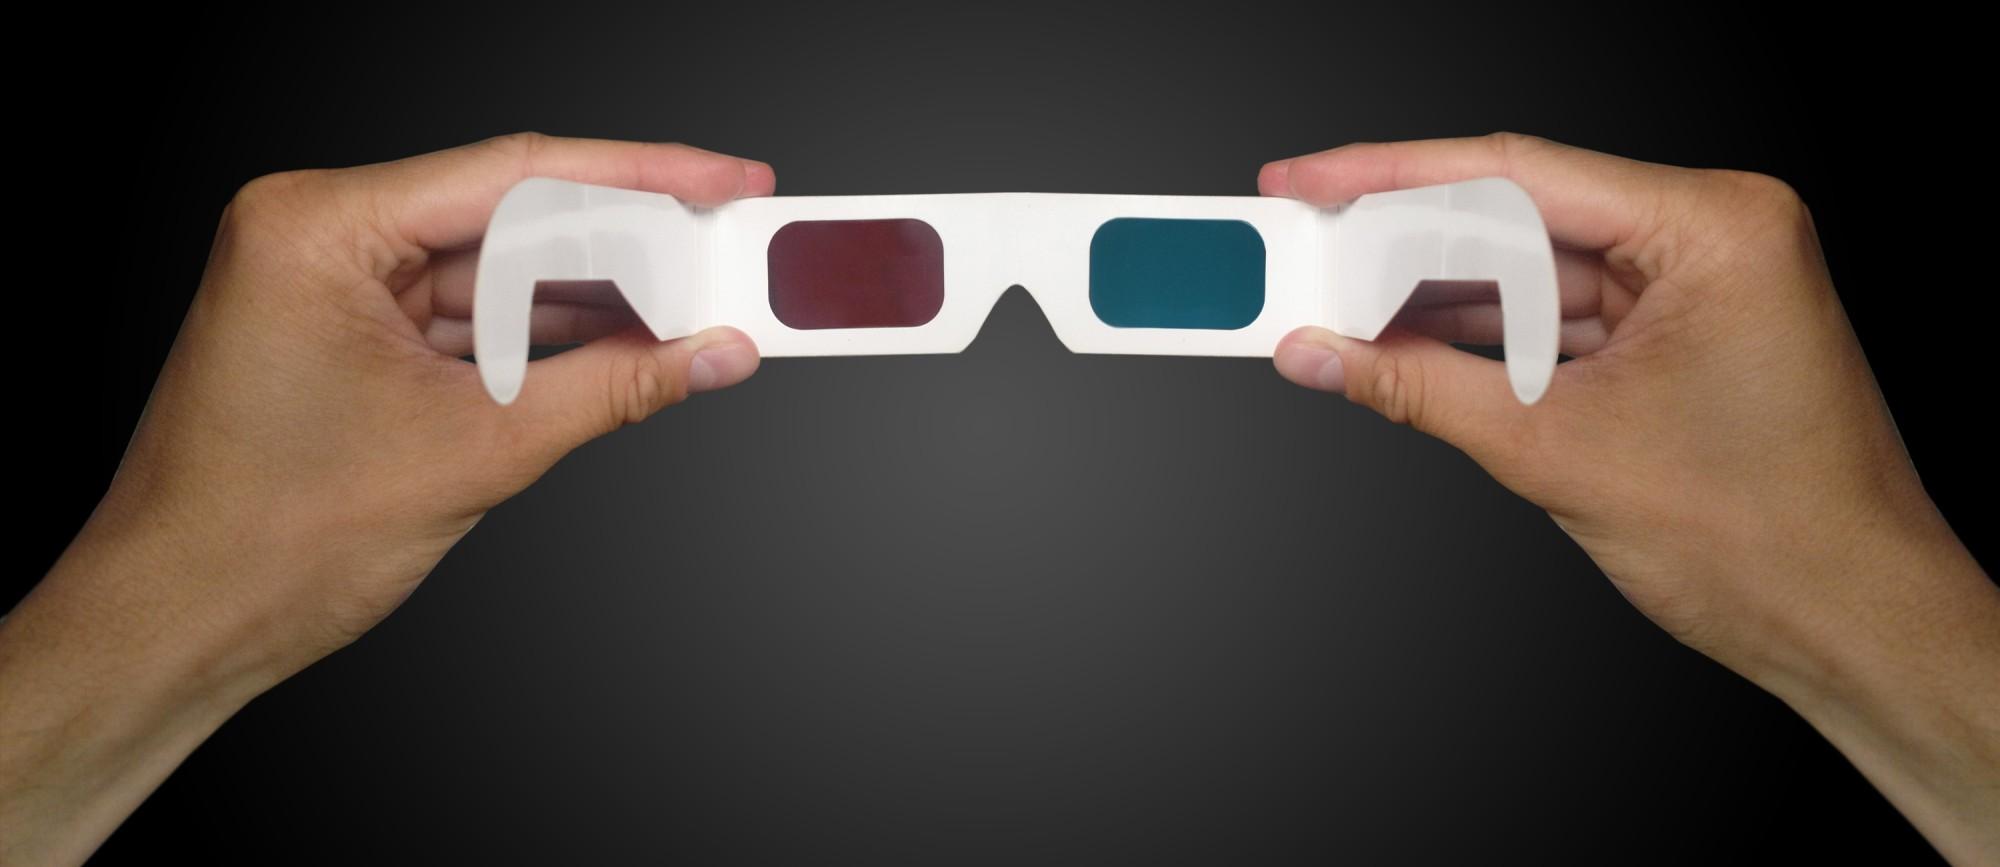 Amerika kor skille sig ud 3D Glasses: Do They Work With Any TV?